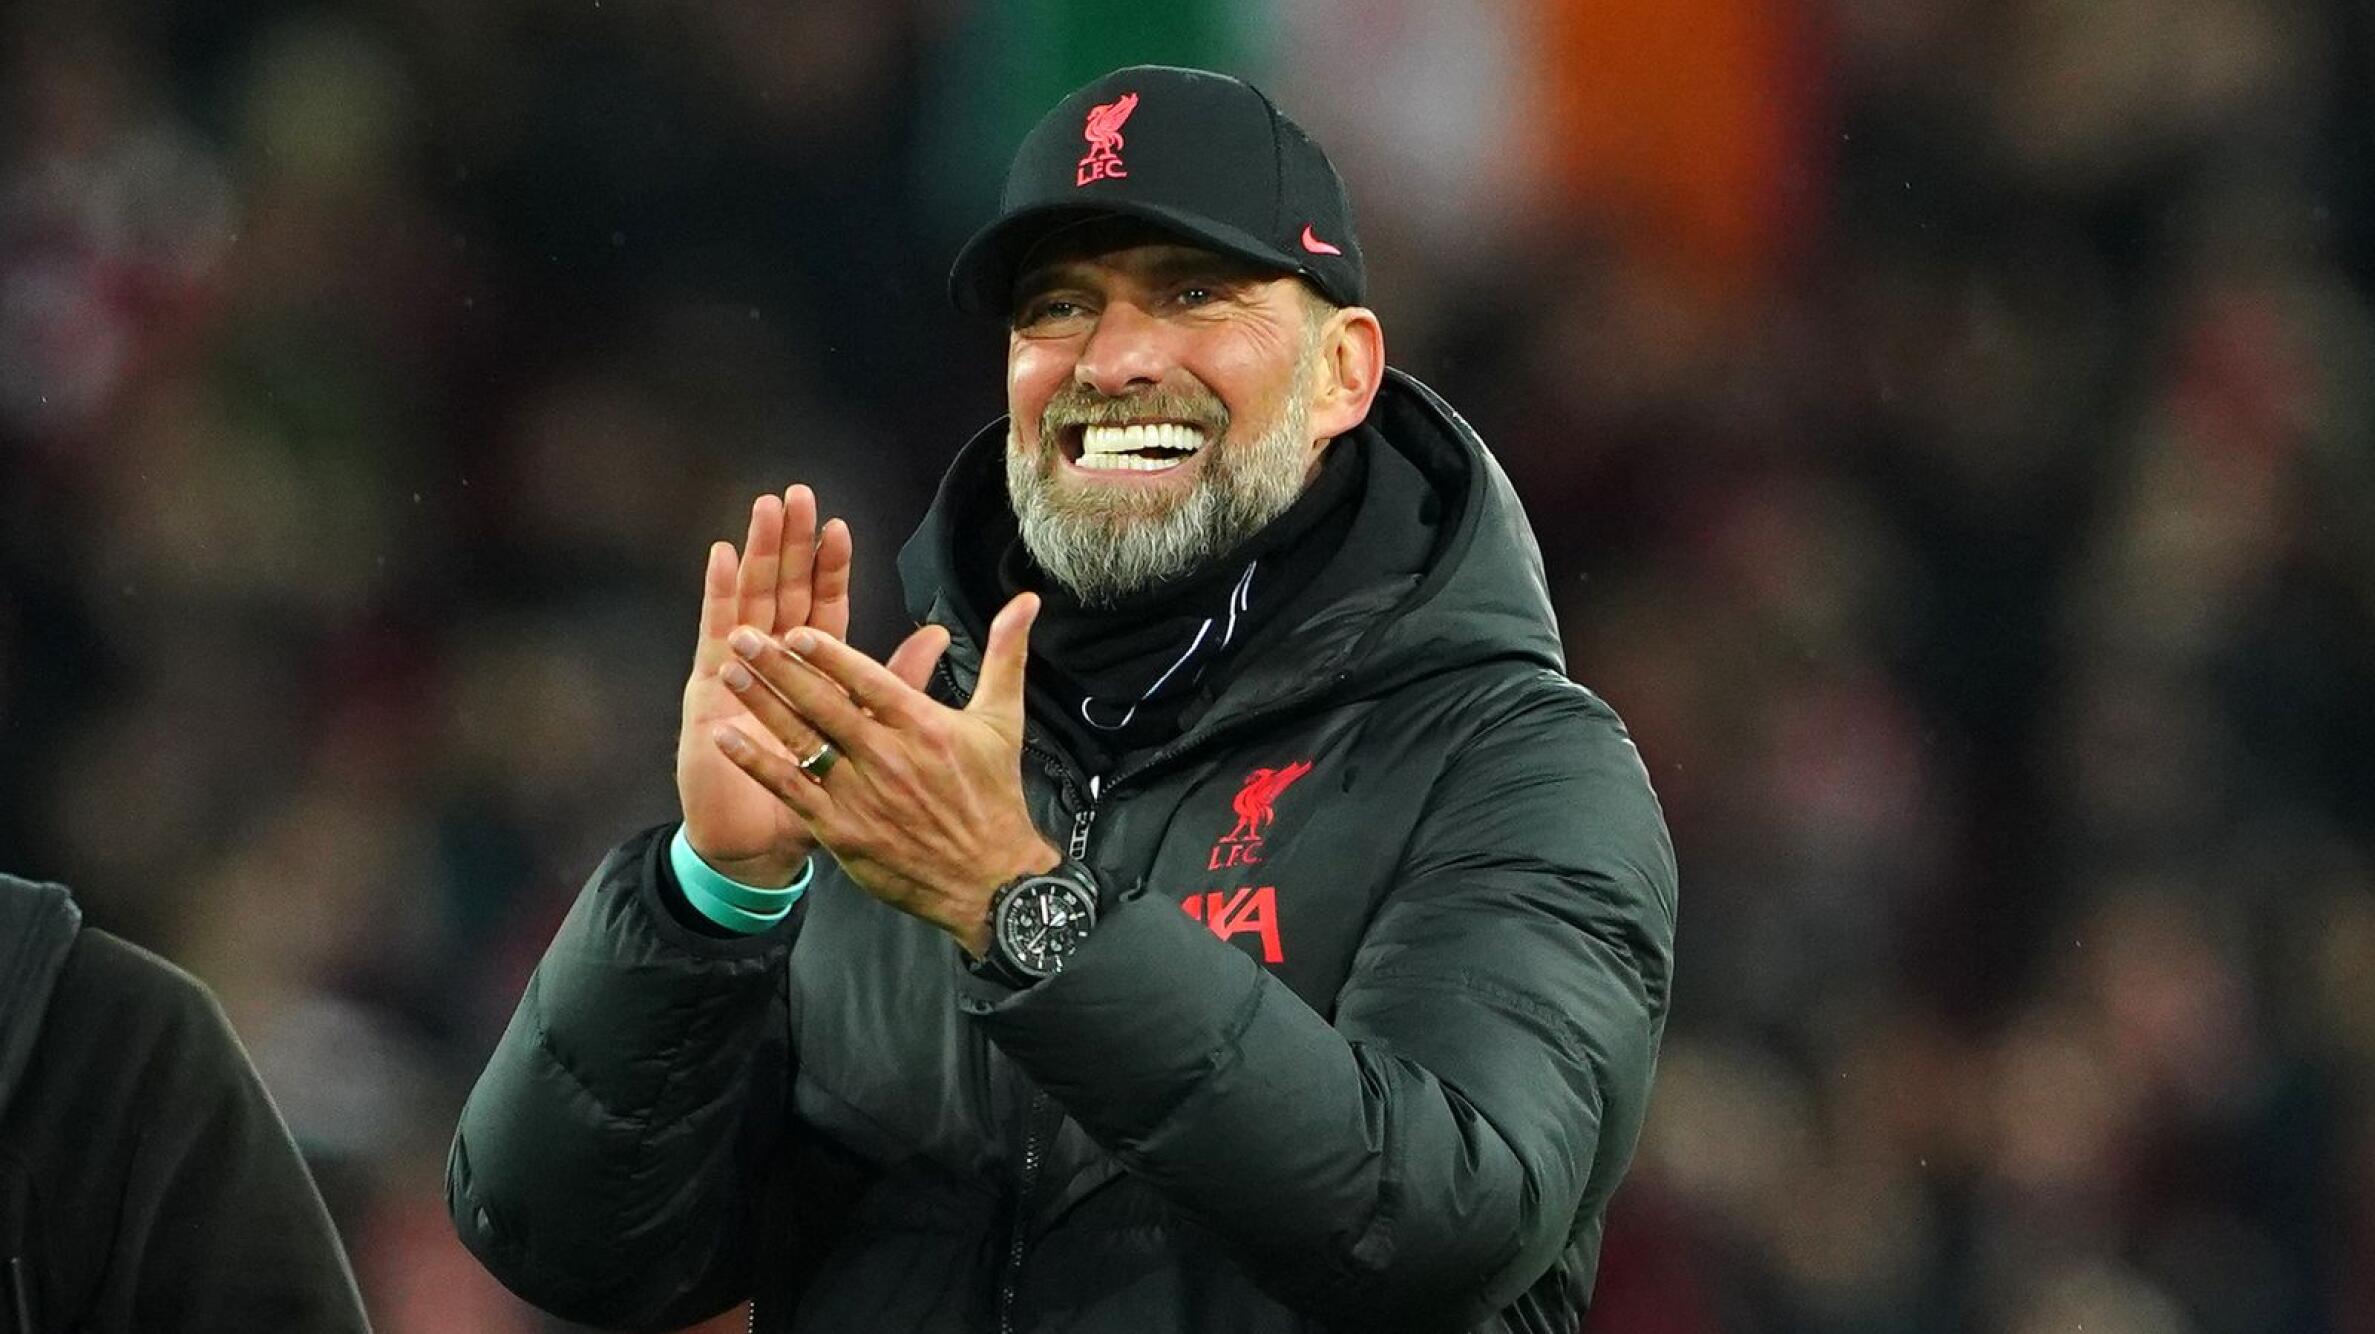 Liverpool coach Jurgen Klopp applauds after his side beat rivals Manchester United 7-0 in their Premier League match at Anfield, Liverpool